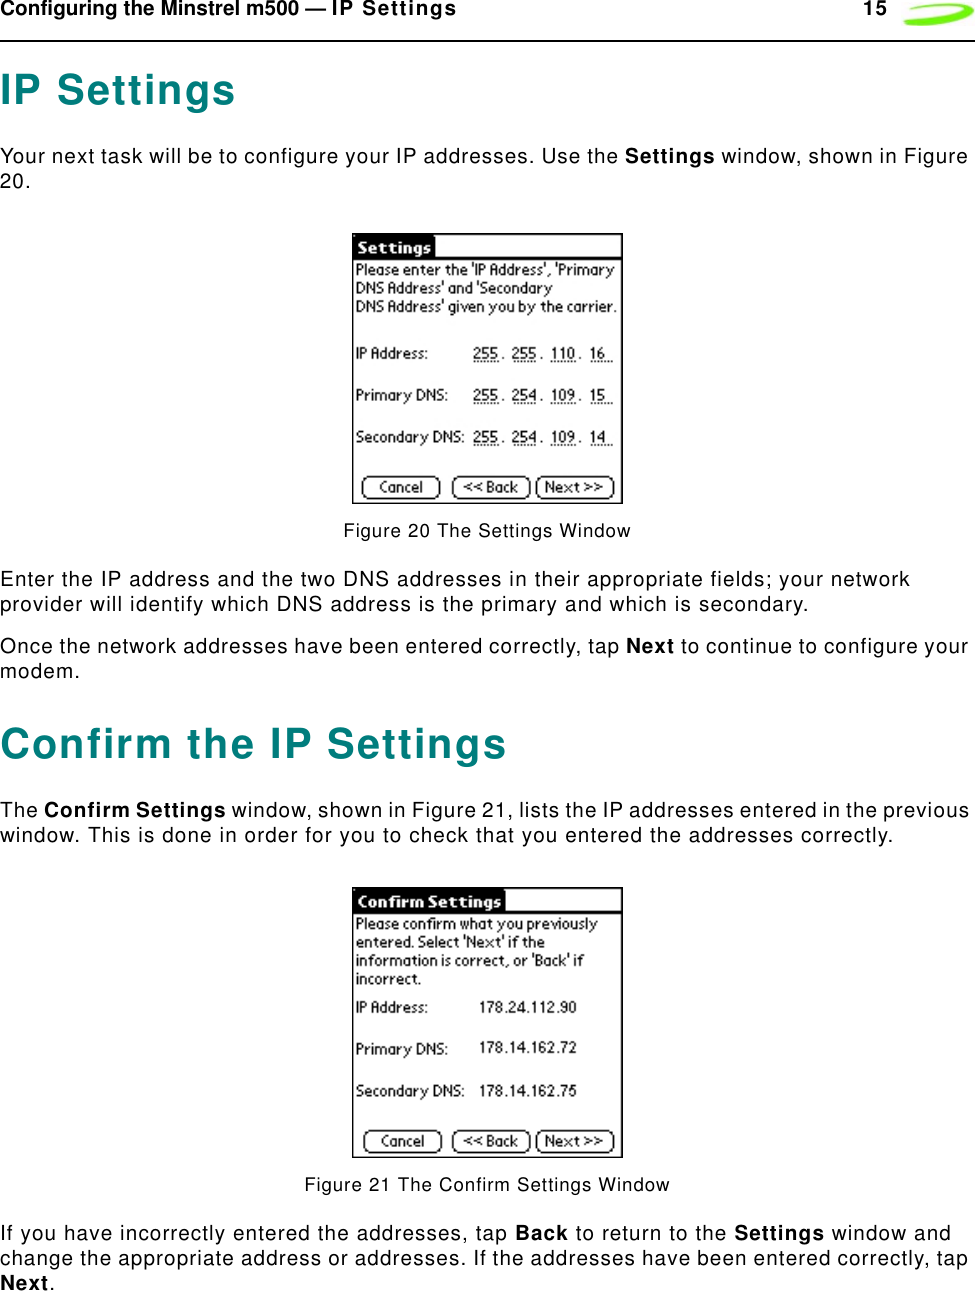 Configuring the Minstrel m500 — IP Settings 15IP SettingsYour next task will be to configure your IP addresses. Use the Settings window, shown in Figure 20.Figure 20 The Settings WindowEnter the IP address and the two DNS addresses in their appropriate fields; your network provider will identify which DNS address is the primary and which is secondary.Once the network addresses have been entered correctly, tap Next to continue to configure your modem.Confirm the IP SettingsThe Confirm Settings window, shown in Figure 21, lists the IP addresses entered in the previous window. This is done in order for you to check that you entered the addresses correctly.Figure 21 The Confirm Settings WindowIf you have incorrectly entered the addresses, tap Back to return to the Settings window and change the appropriate address or addresses. If the addresses have been entered correctly, tap Next.